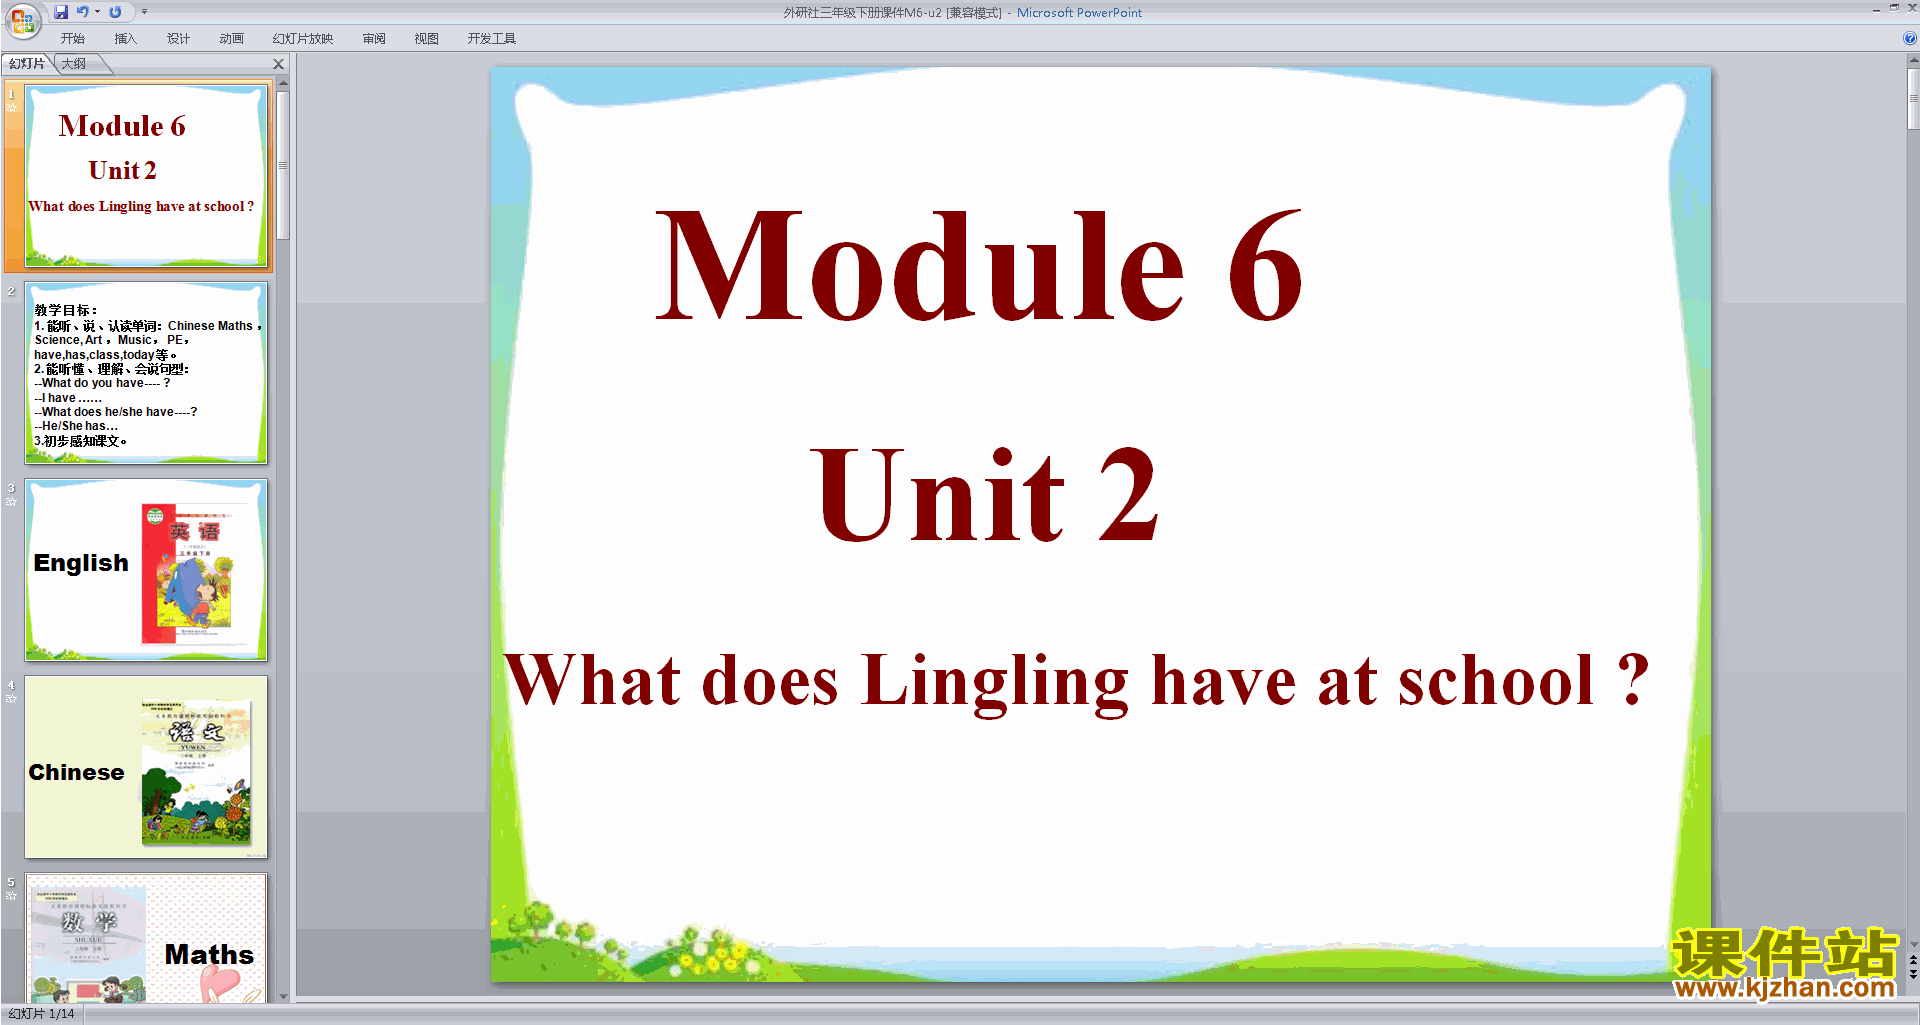 ʿWhat does Lingling have at schoolpptμ